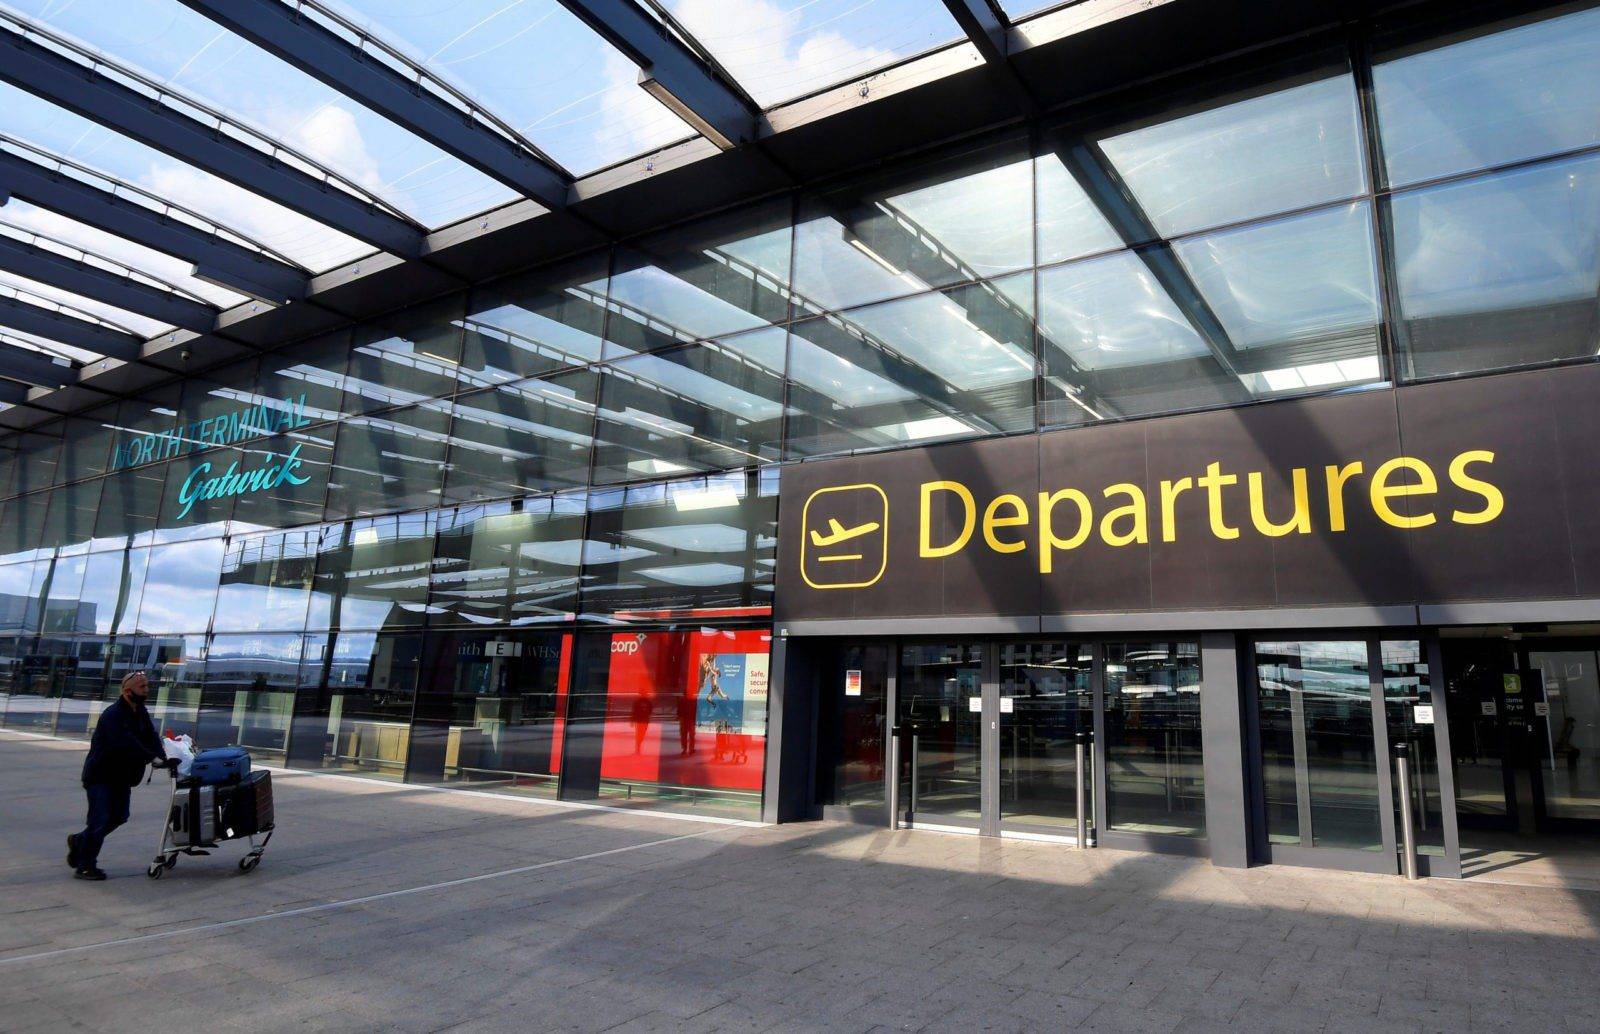 From Cambridge to Gatwick Airport taxi service